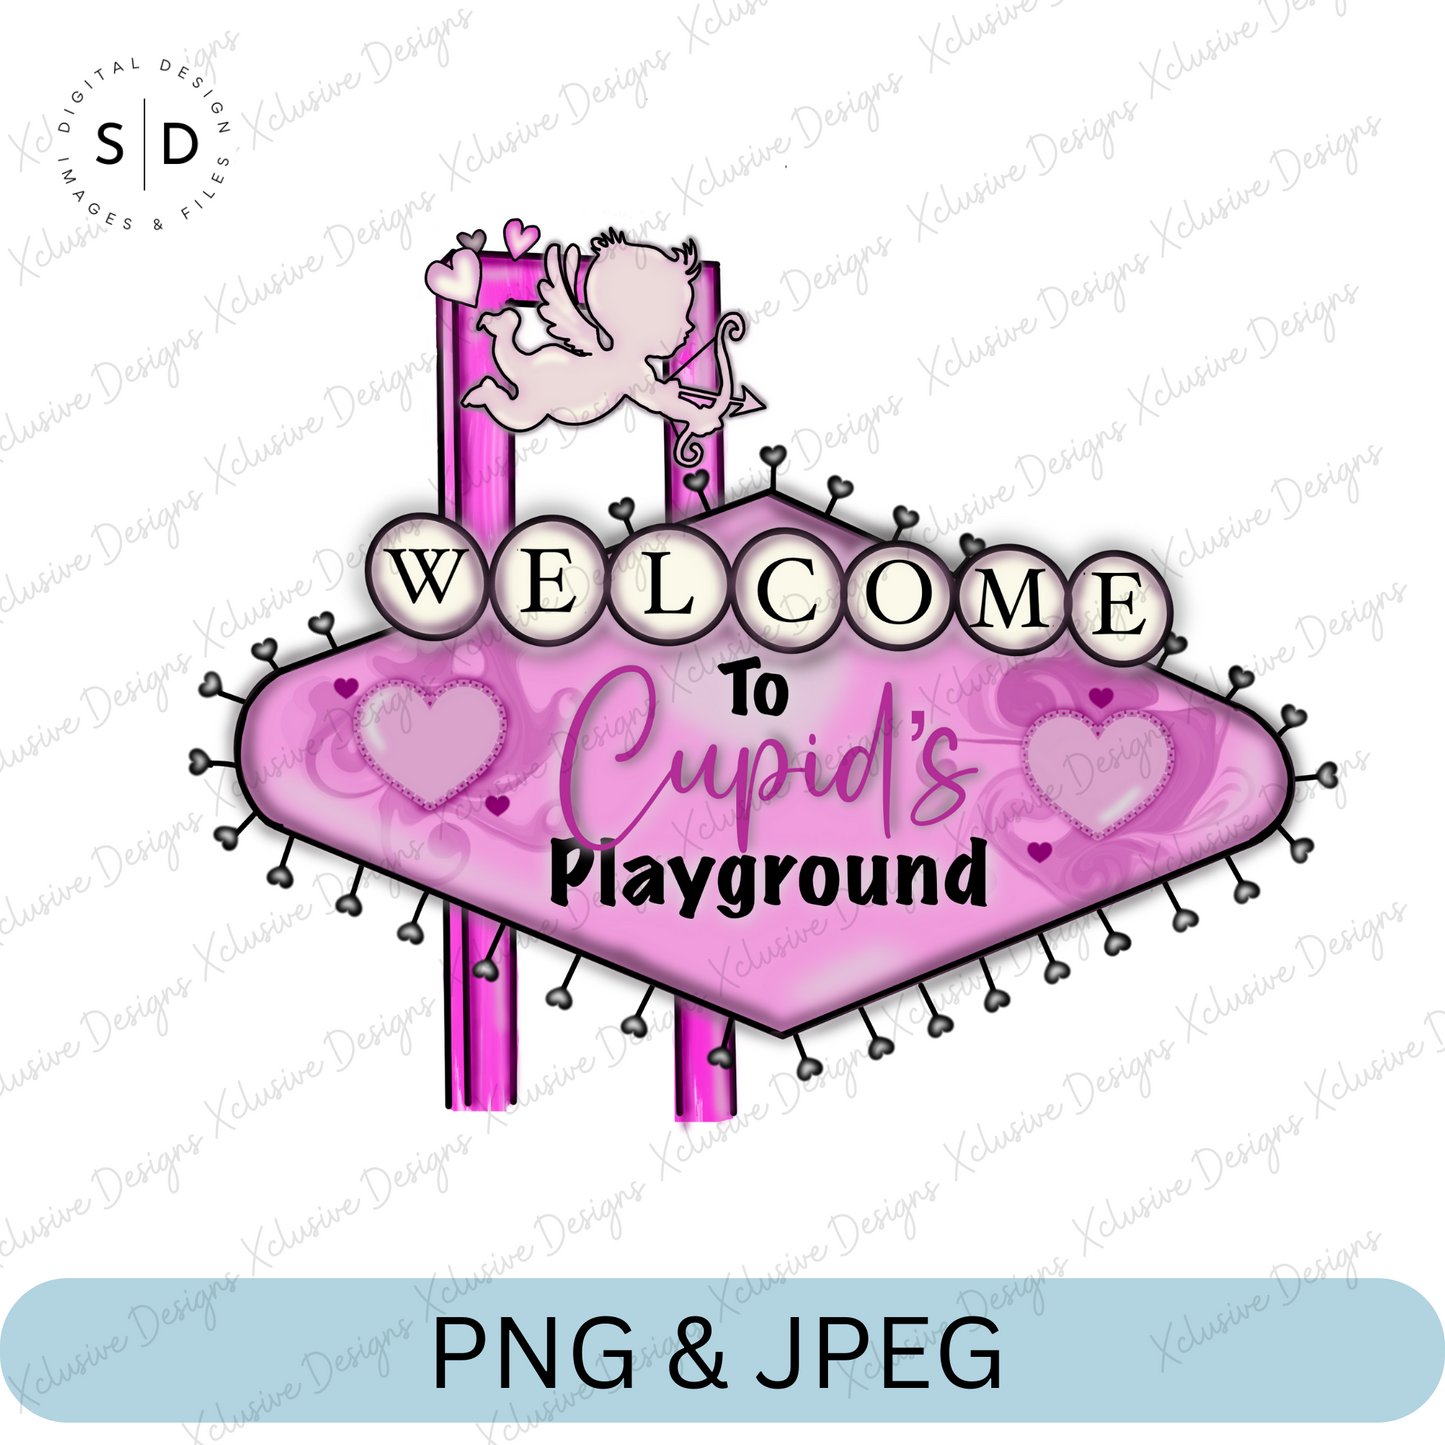 Welcome To Cupid's Playground PNG